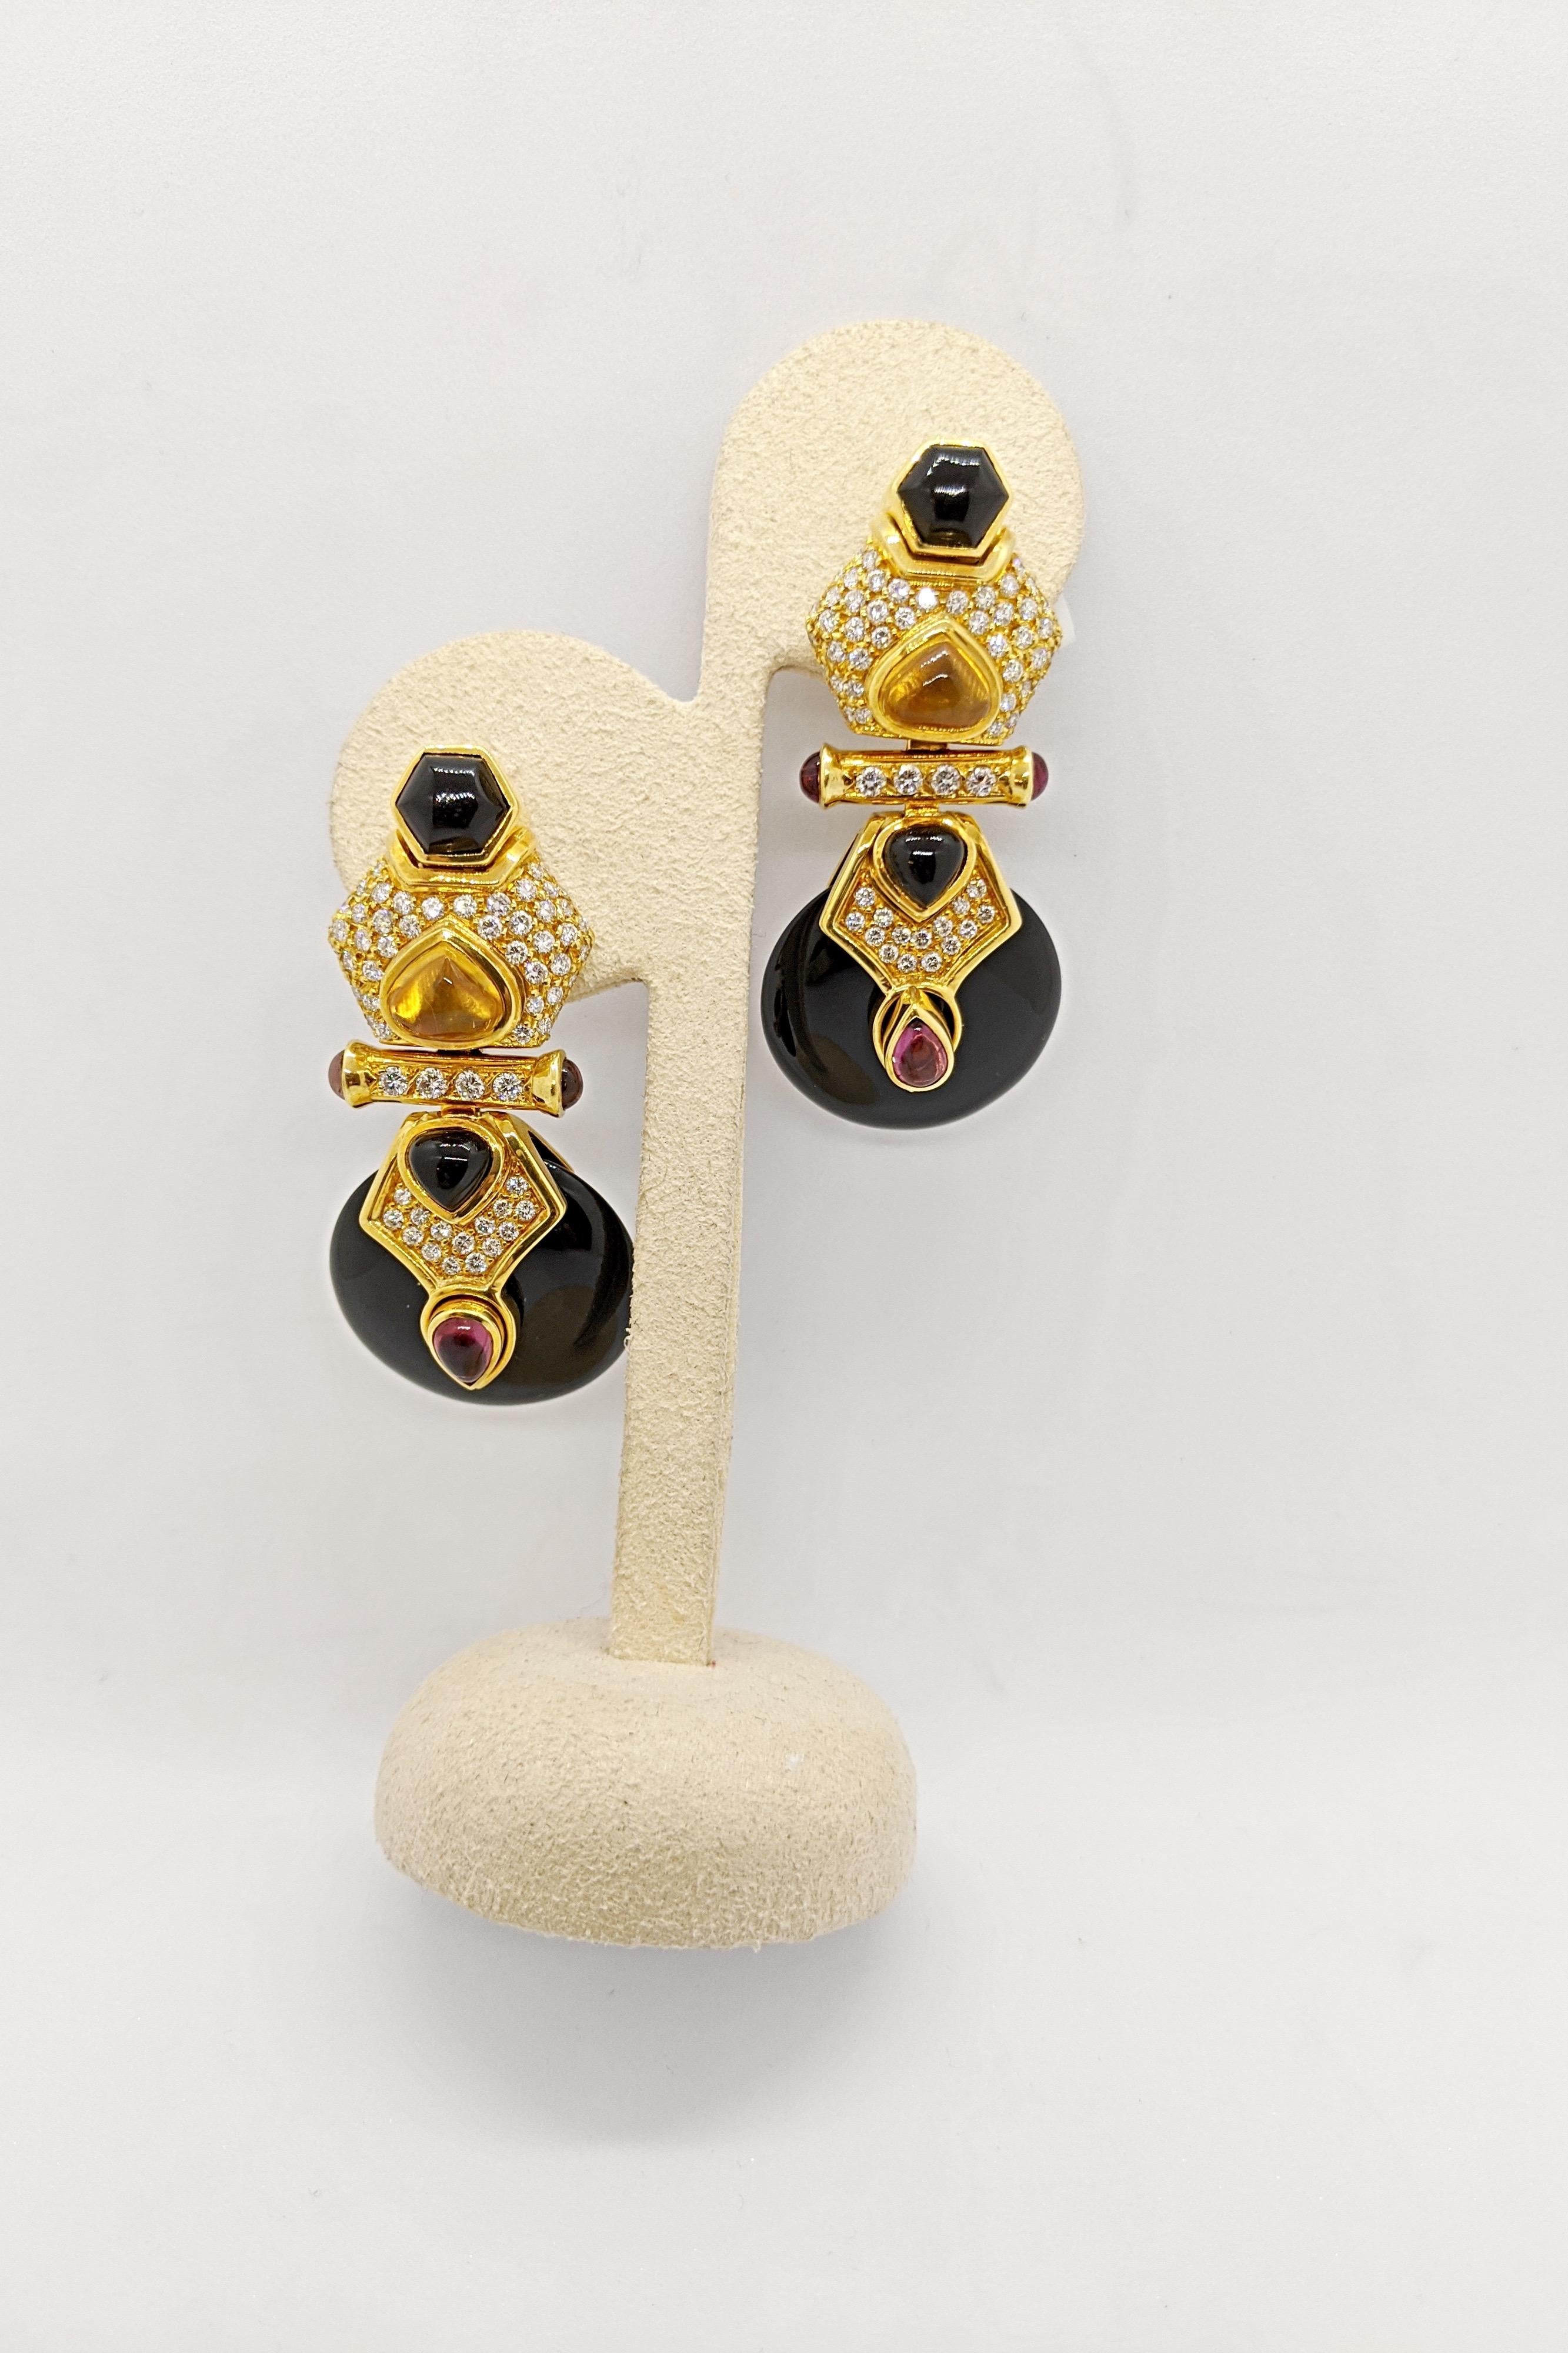 1990's Chic ! These oh so classic 18 karat yellow gold earrings are designed with pave set diamonds and semi precious cabachon stones of citrine,  pink tourmaline, and black onyx. A black onyx disc hangs from the lower part of the earrings. The